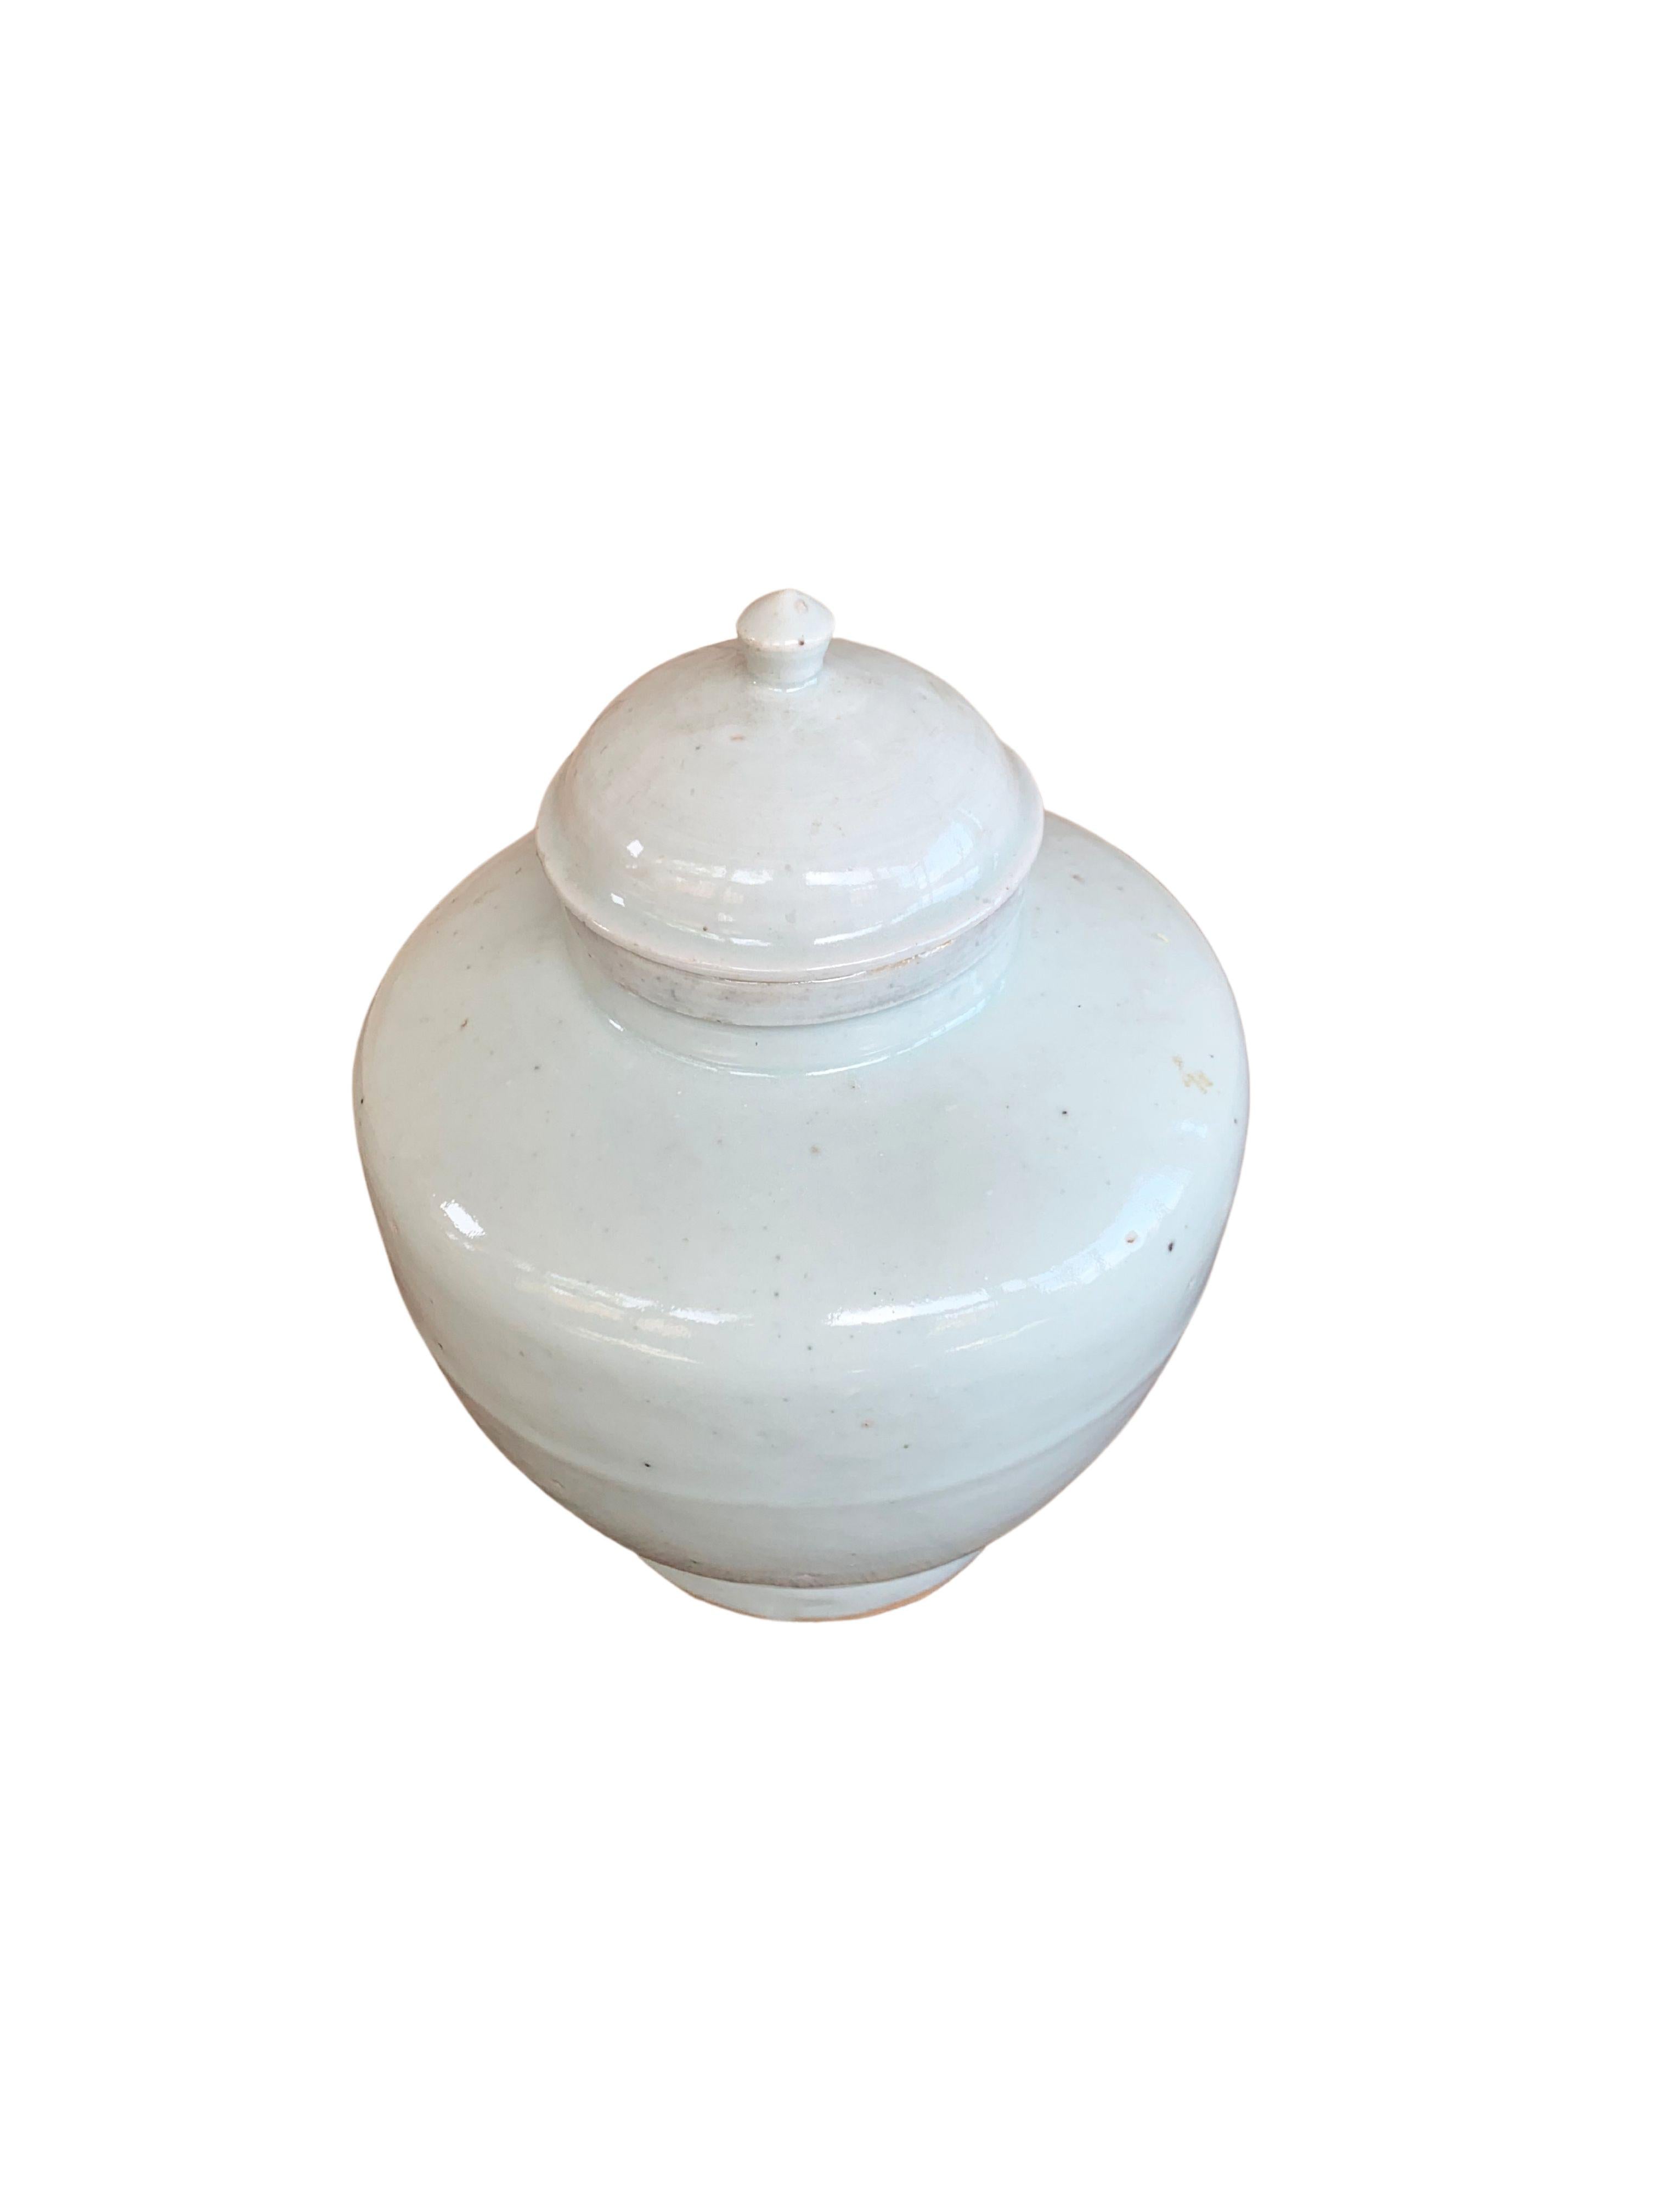 Other Chinese Off-White Ceramic Ginger Jar